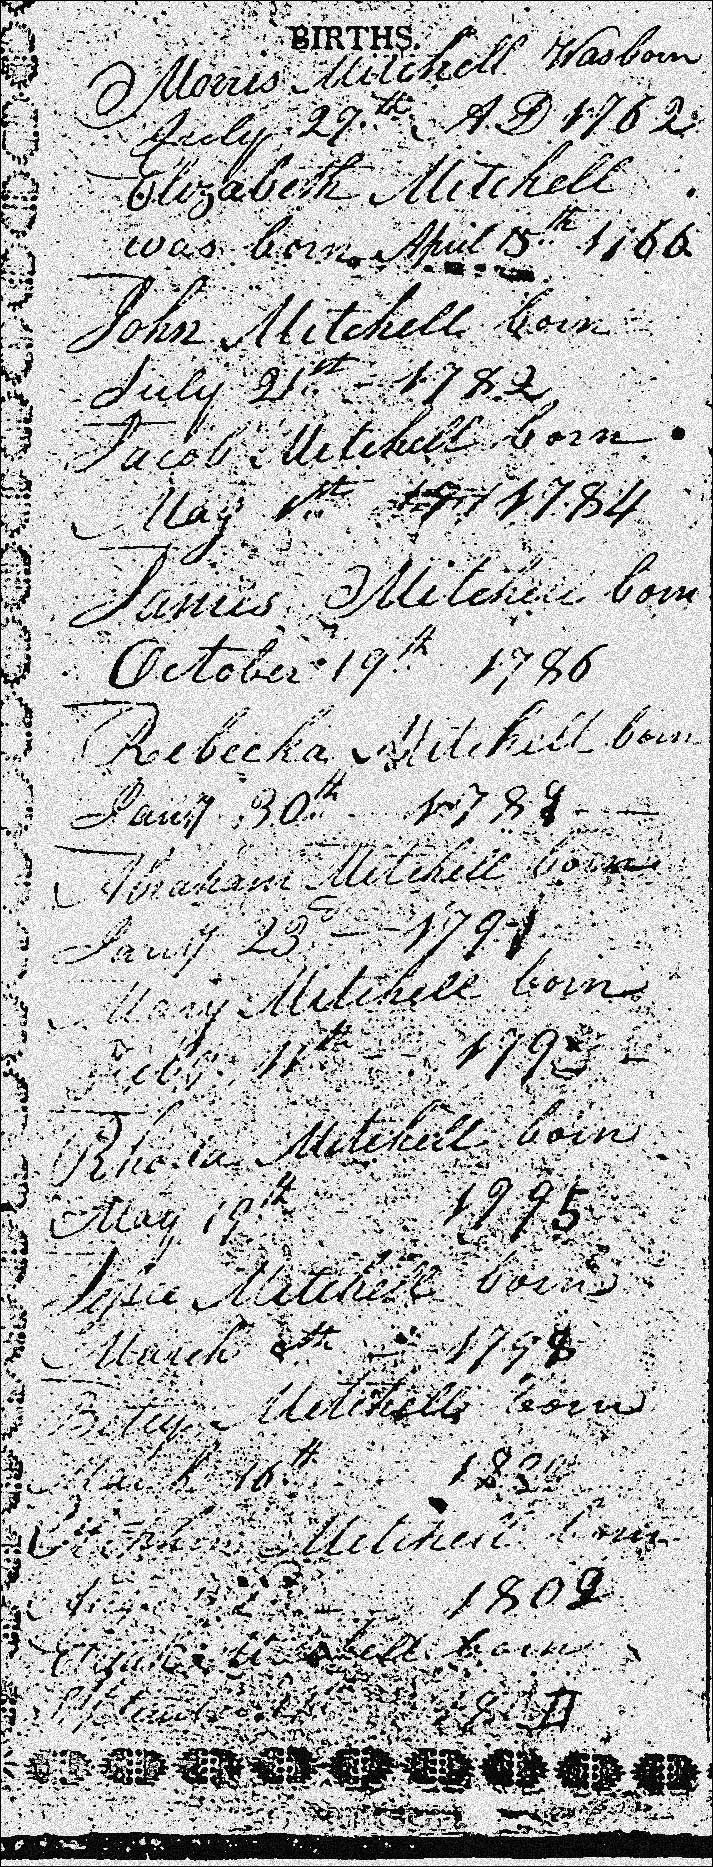 Morris Mitchell Family Bible Record